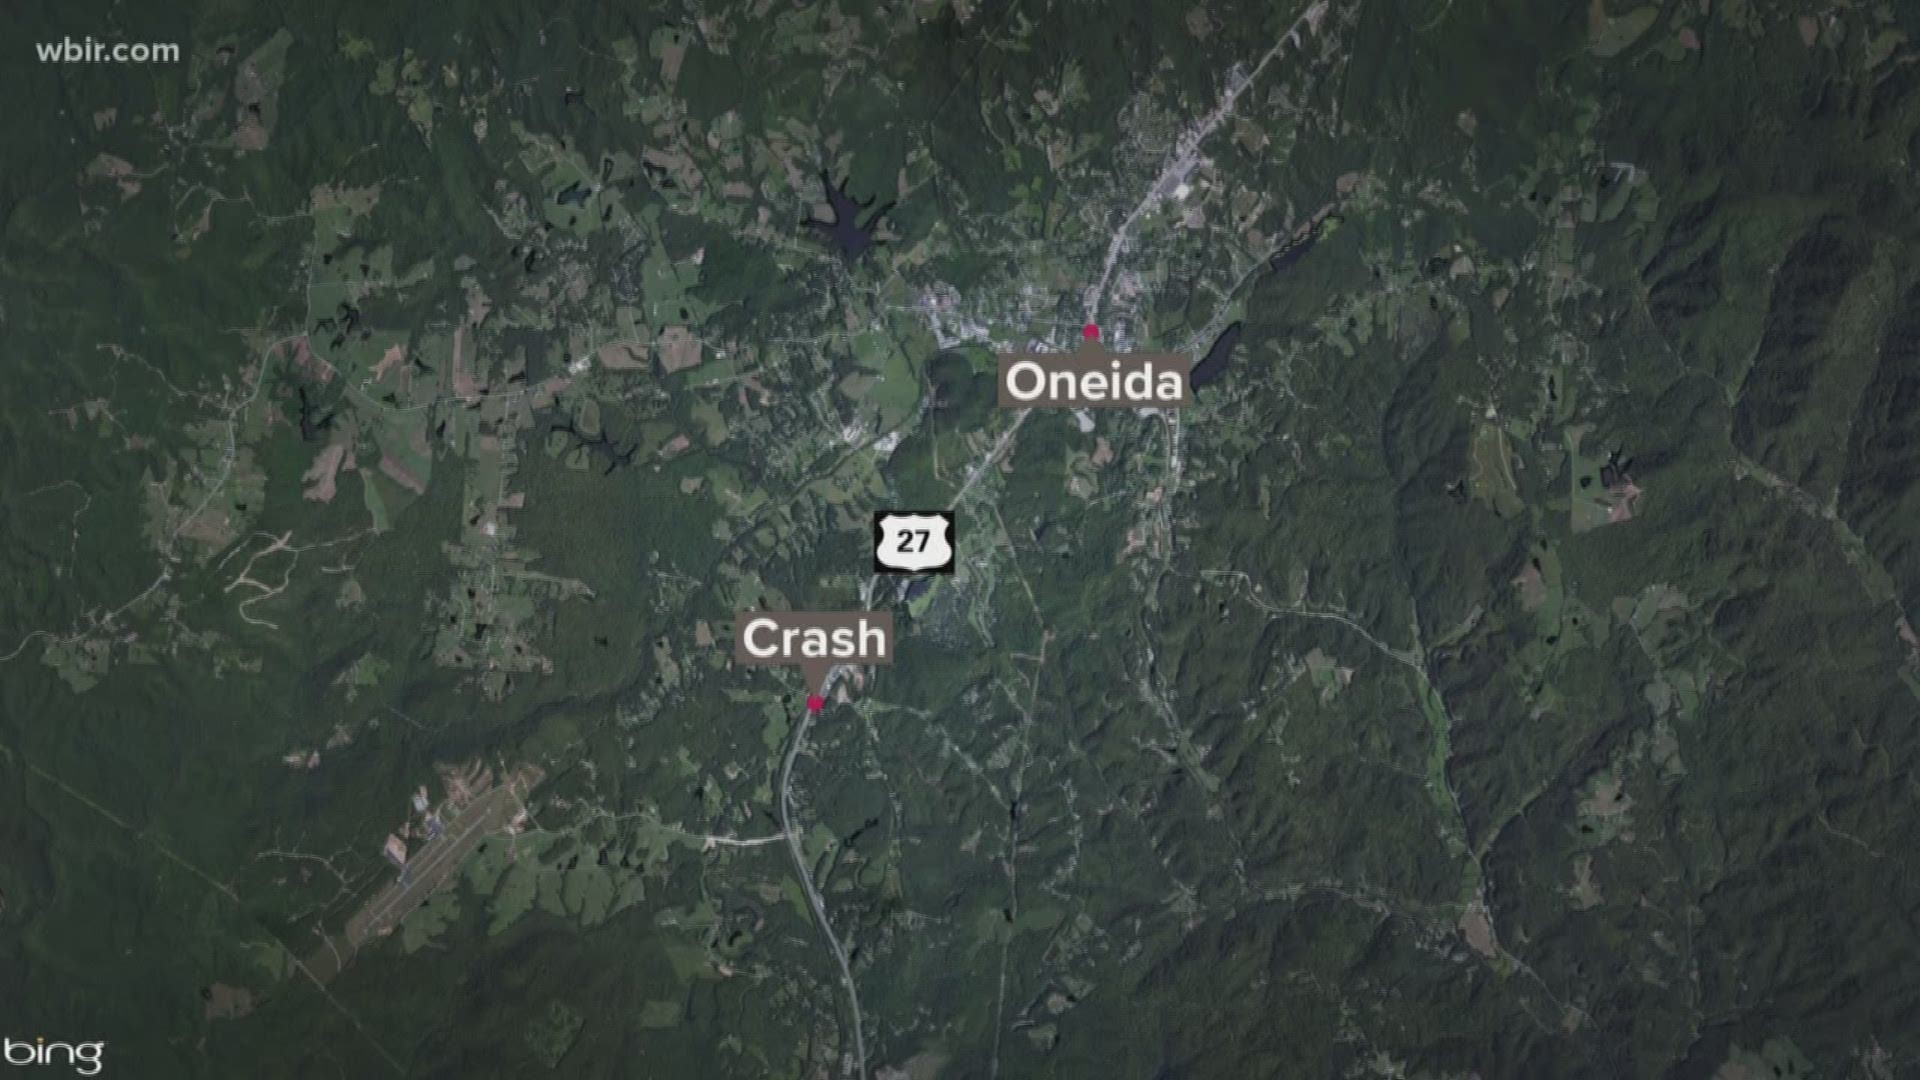 A Scott County teen is dead and several others are hurt after a deadly crash on Friday night on U.S. Highway 27 near Oneida City limits, according to a THP report. A Ford Focus hit a pickup truck in a near head-on collision before spinning and hitting another car, the report said.